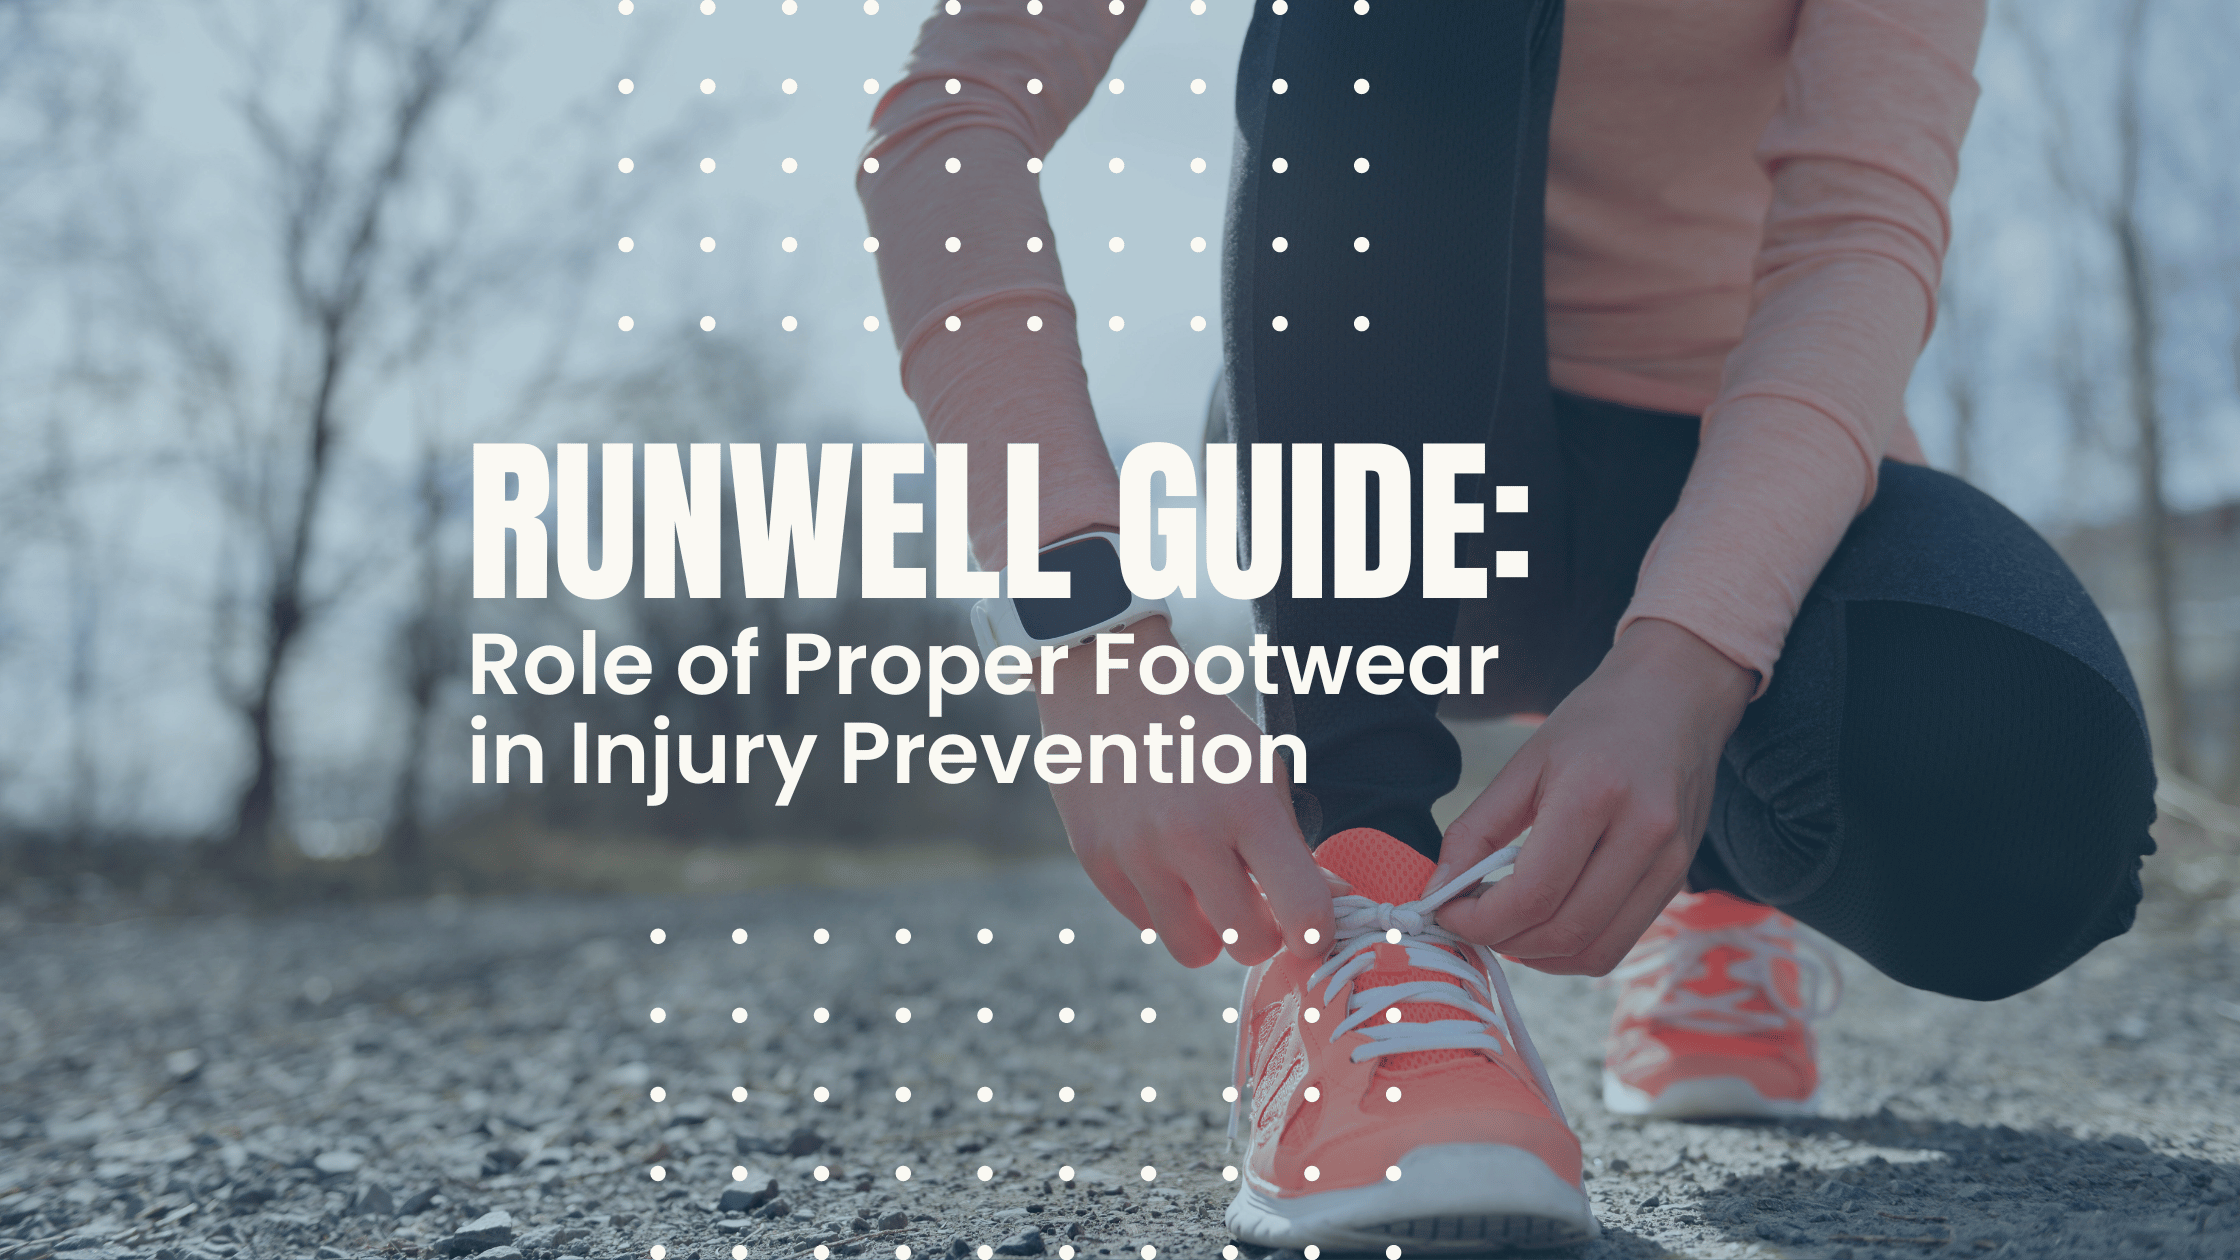 A RunWell Guide: The Role of Proper Footwear in Injury Prevention